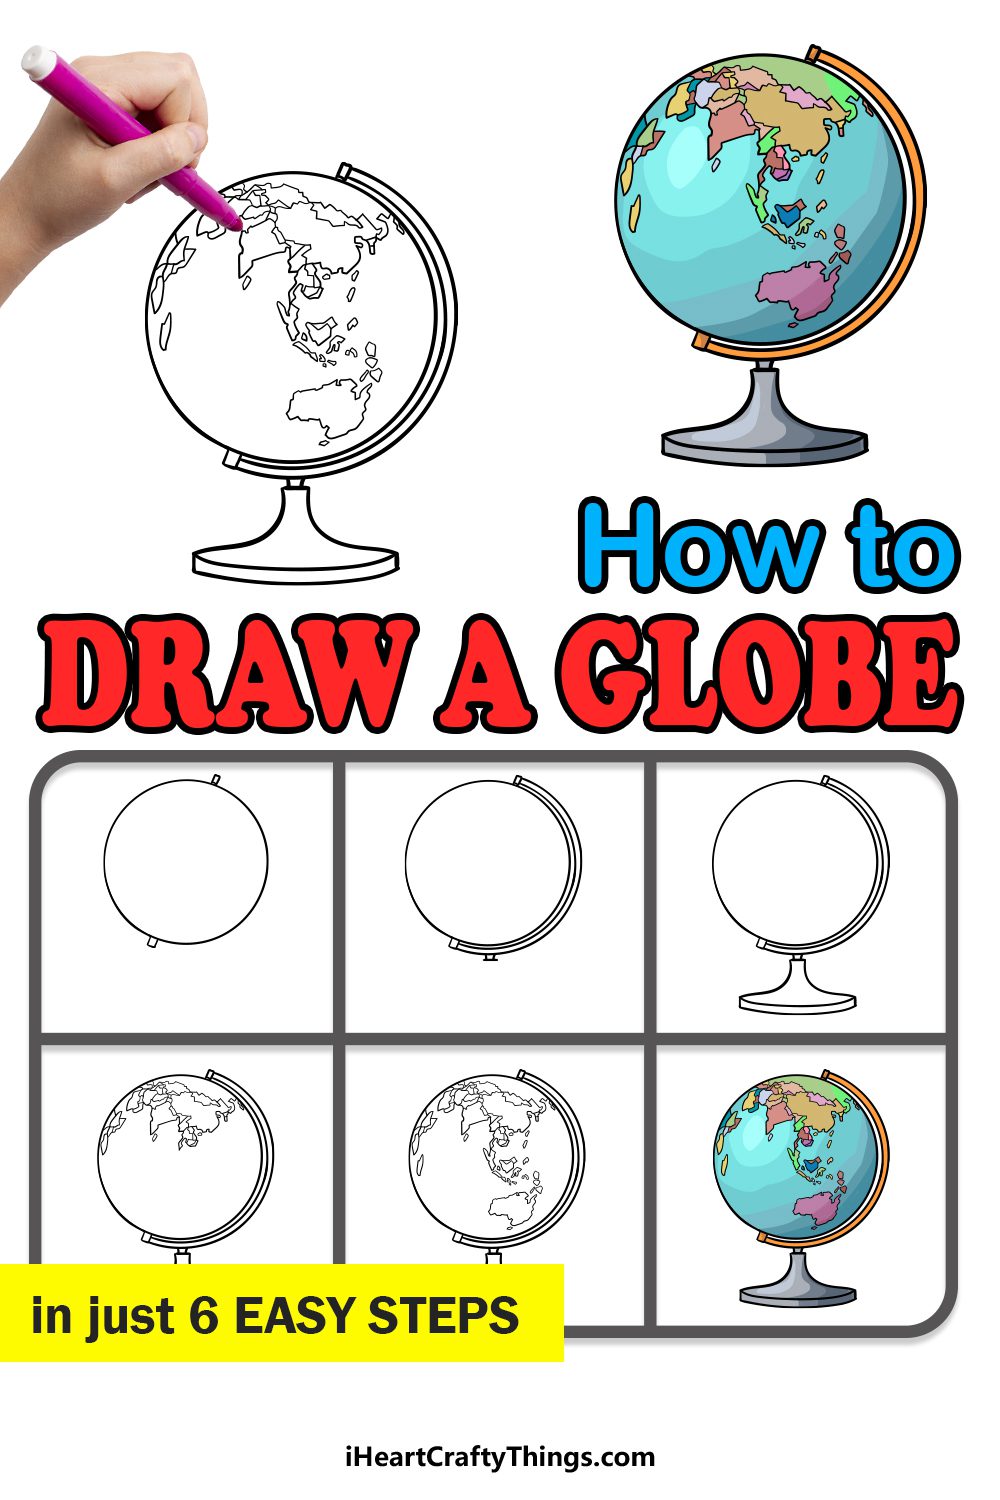 A step by step tutorial on how to draw a globe is shown.